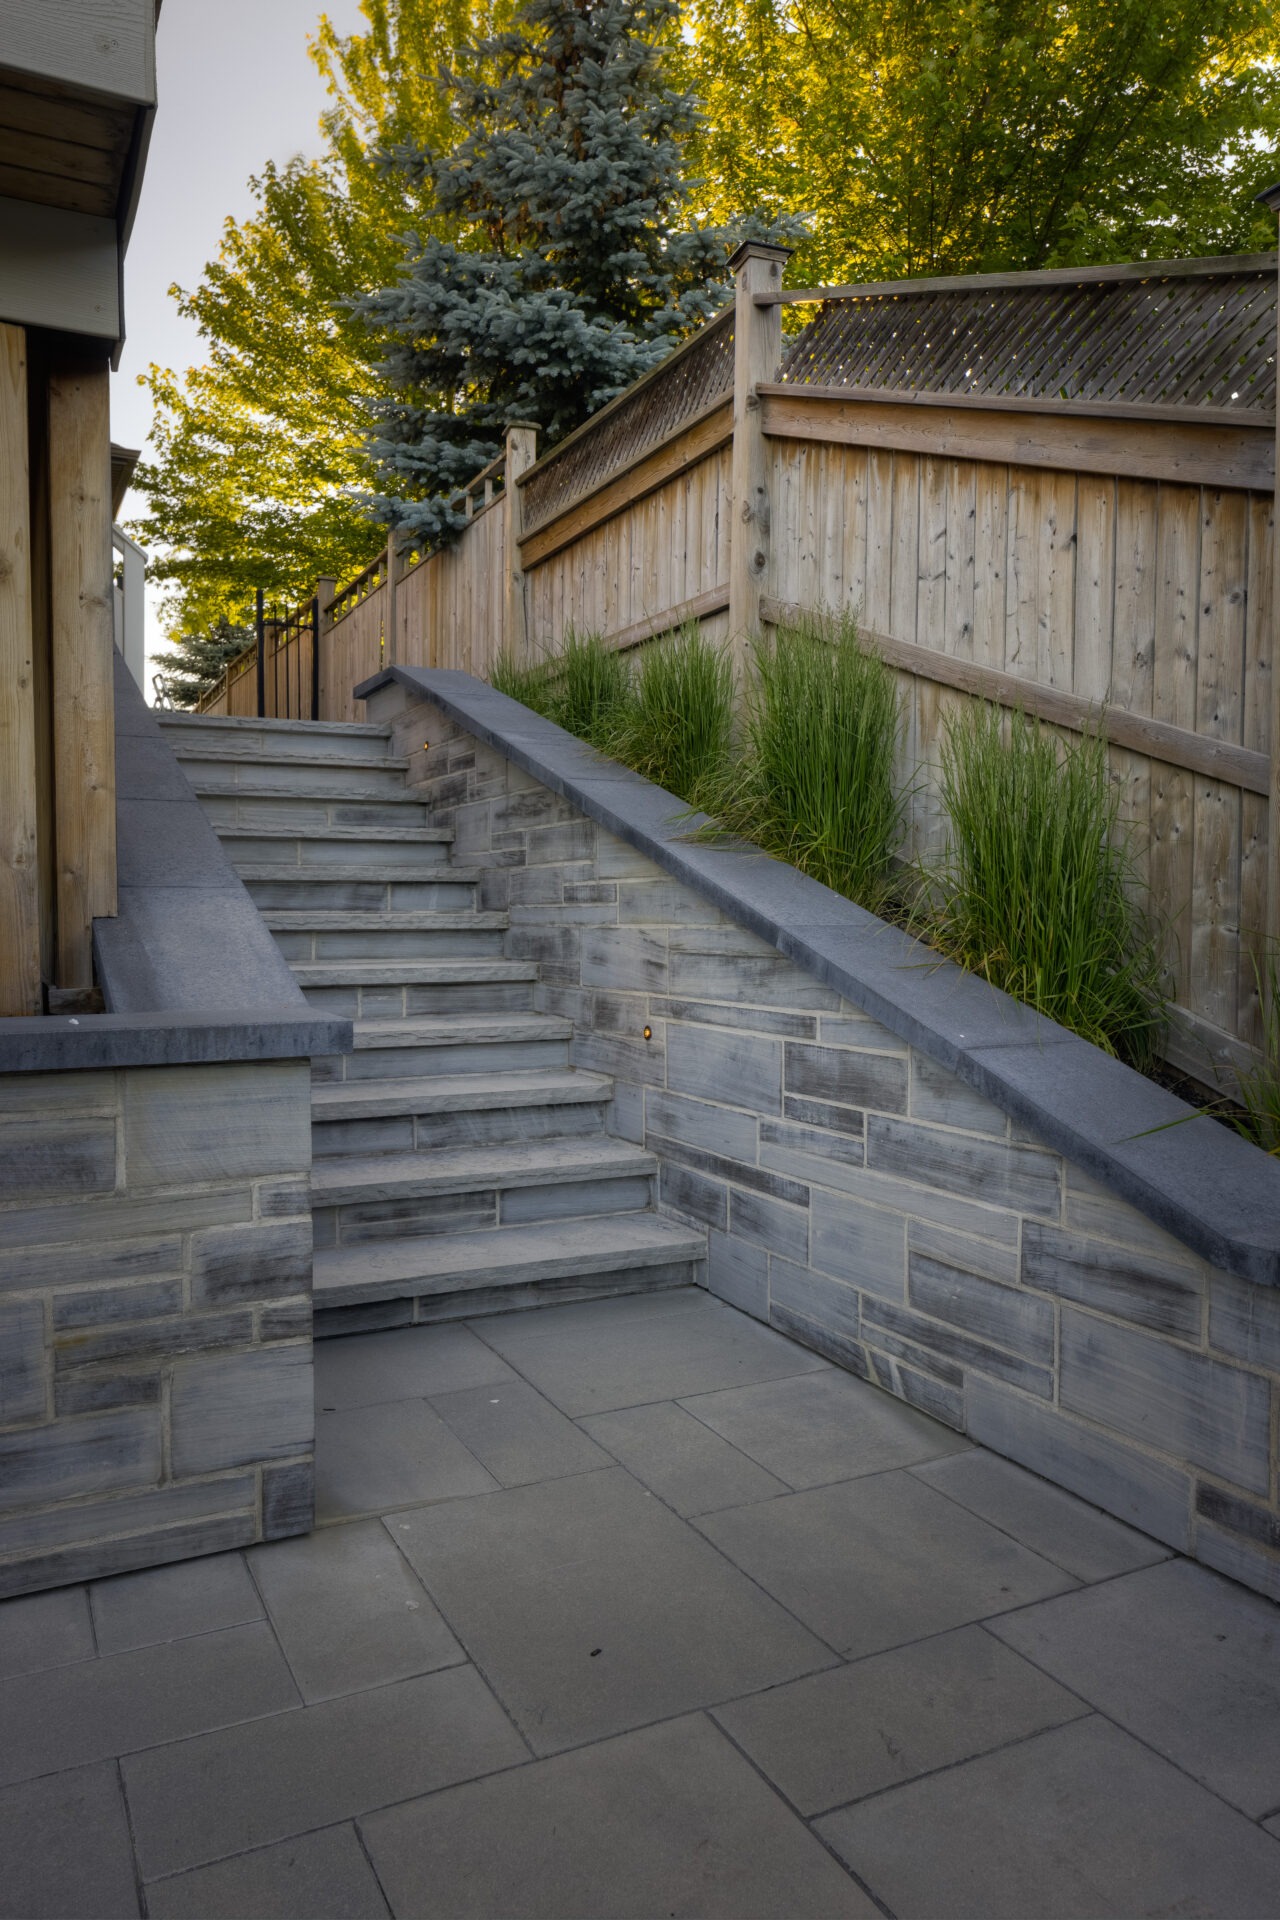 The image shows an outdoor staircase with gray stone tiling, flanked by wooden fencing and green ornamental grasses, leading to a residential area.